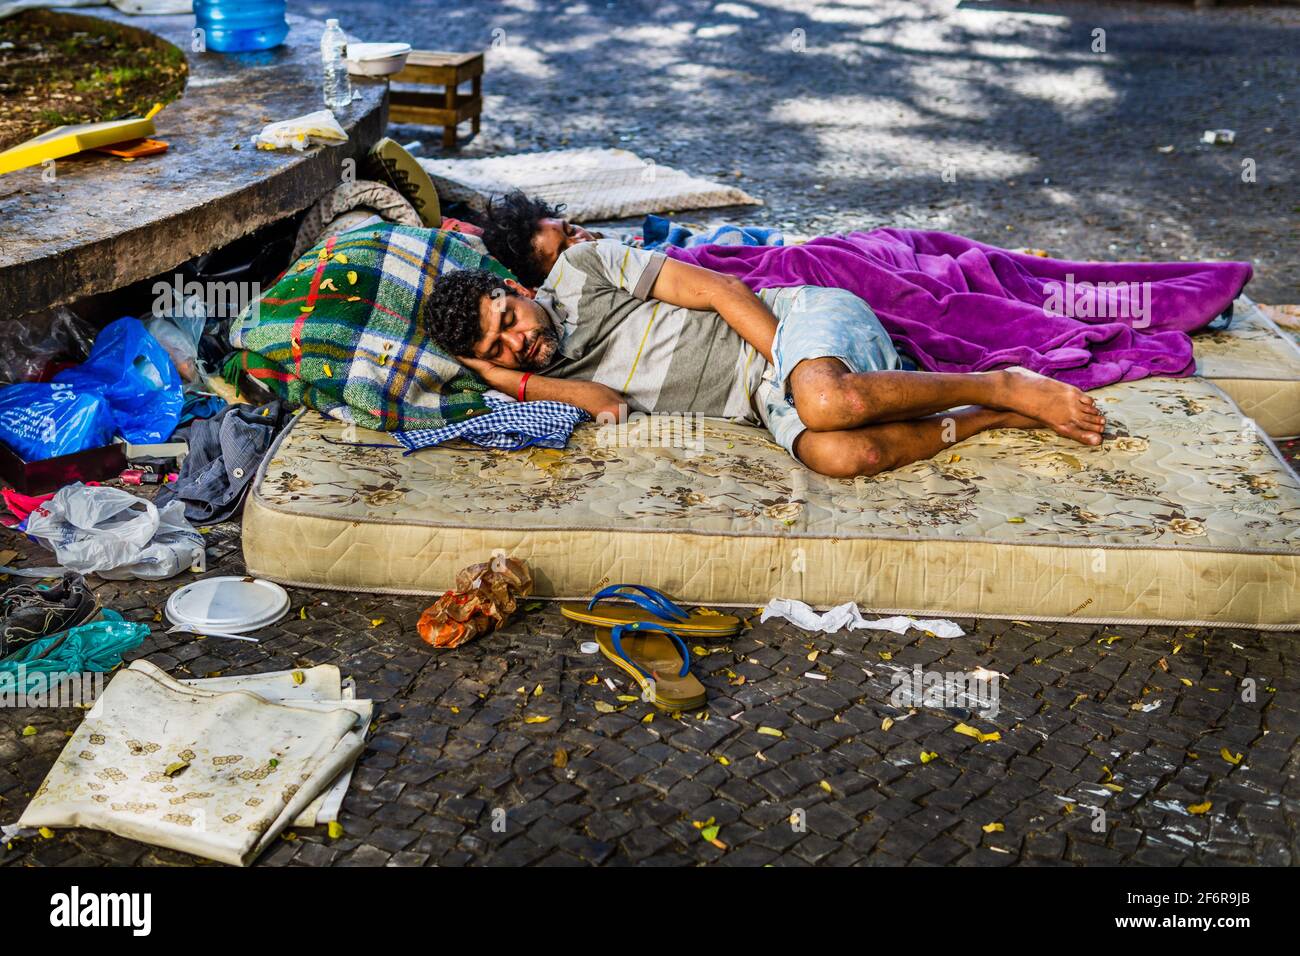 Brazilian homeless couple sleeping on a mattress on the sidewalk of a street in Belo Horizonte, Brazil, surrounded by trash and dirty belongings. Stock Photo